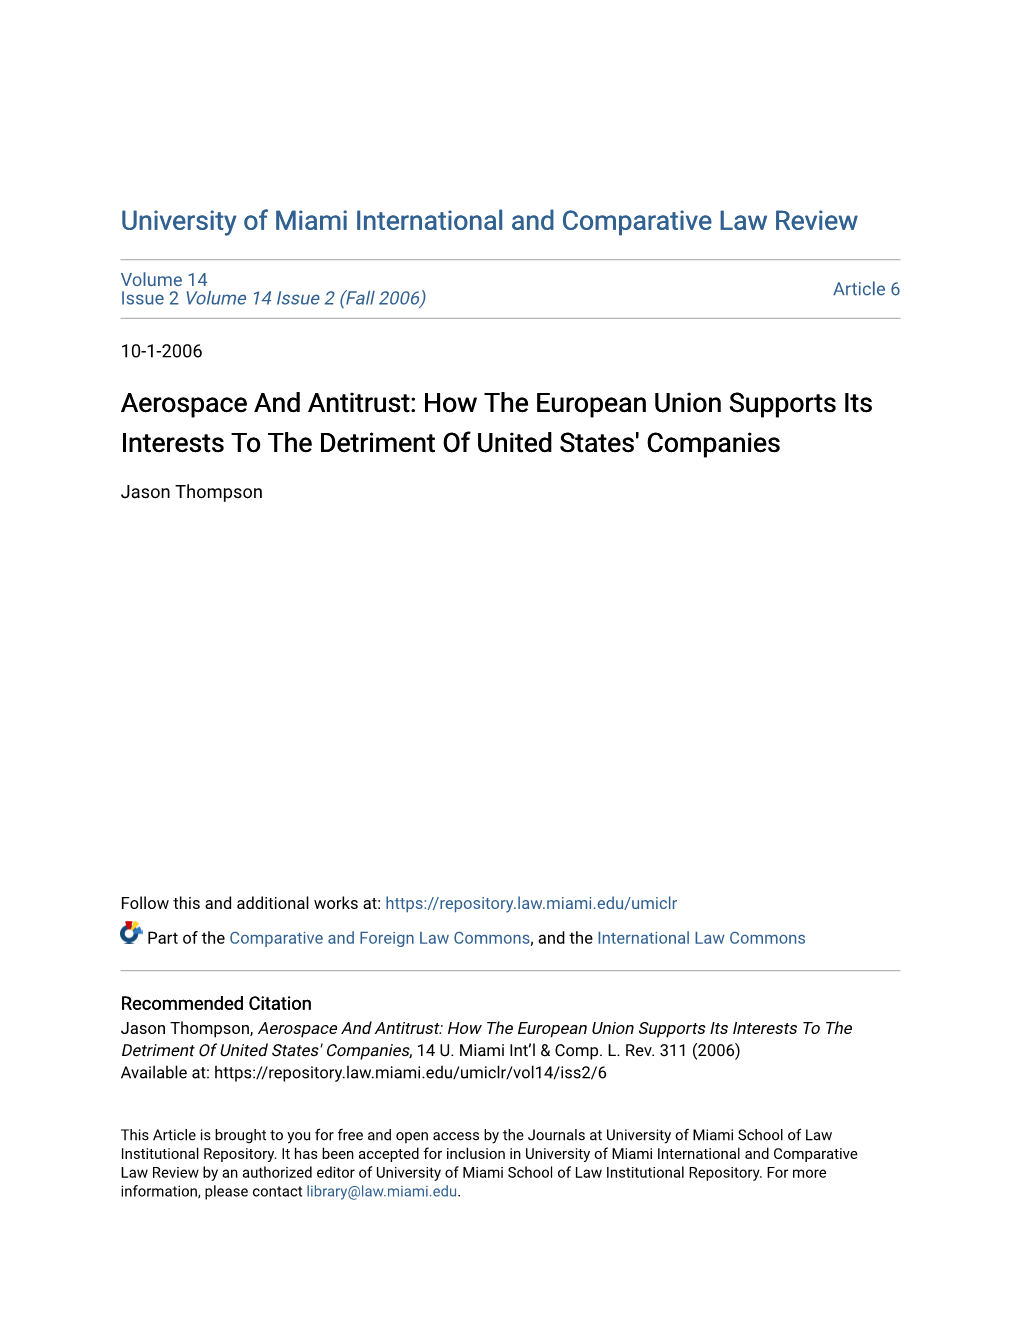 Aerospace and Antitrust: How the European Union Supports Its Interests to the Detriment of United States' Companies